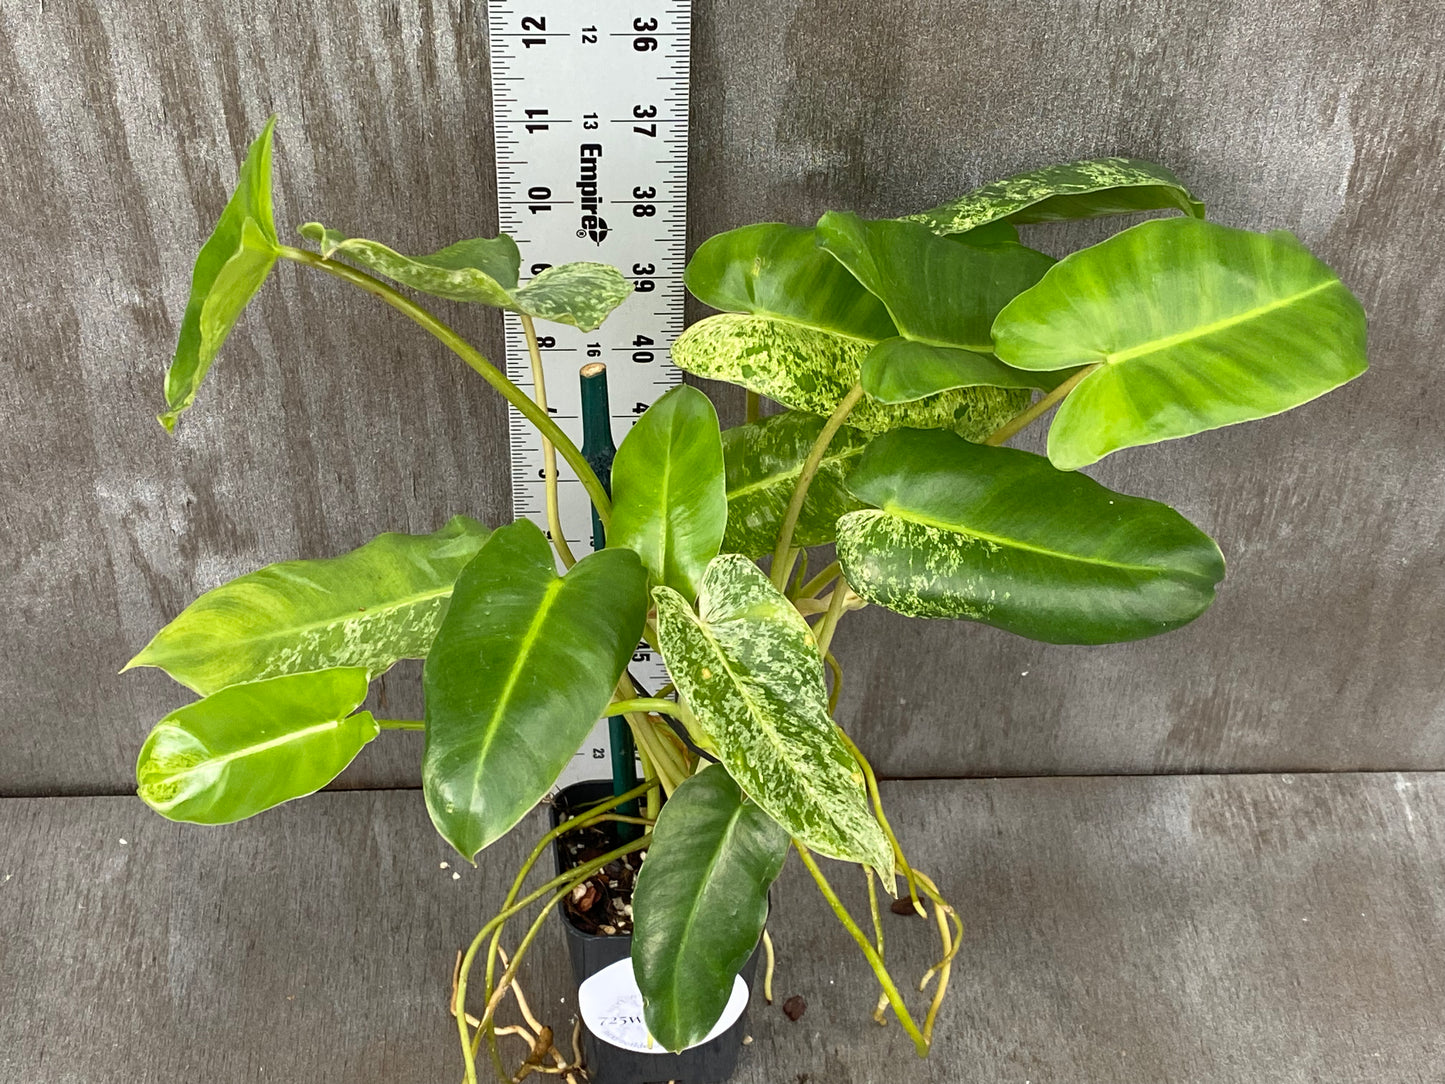 Philodendron Mint Burle Marx (Tons of Growth Points!)